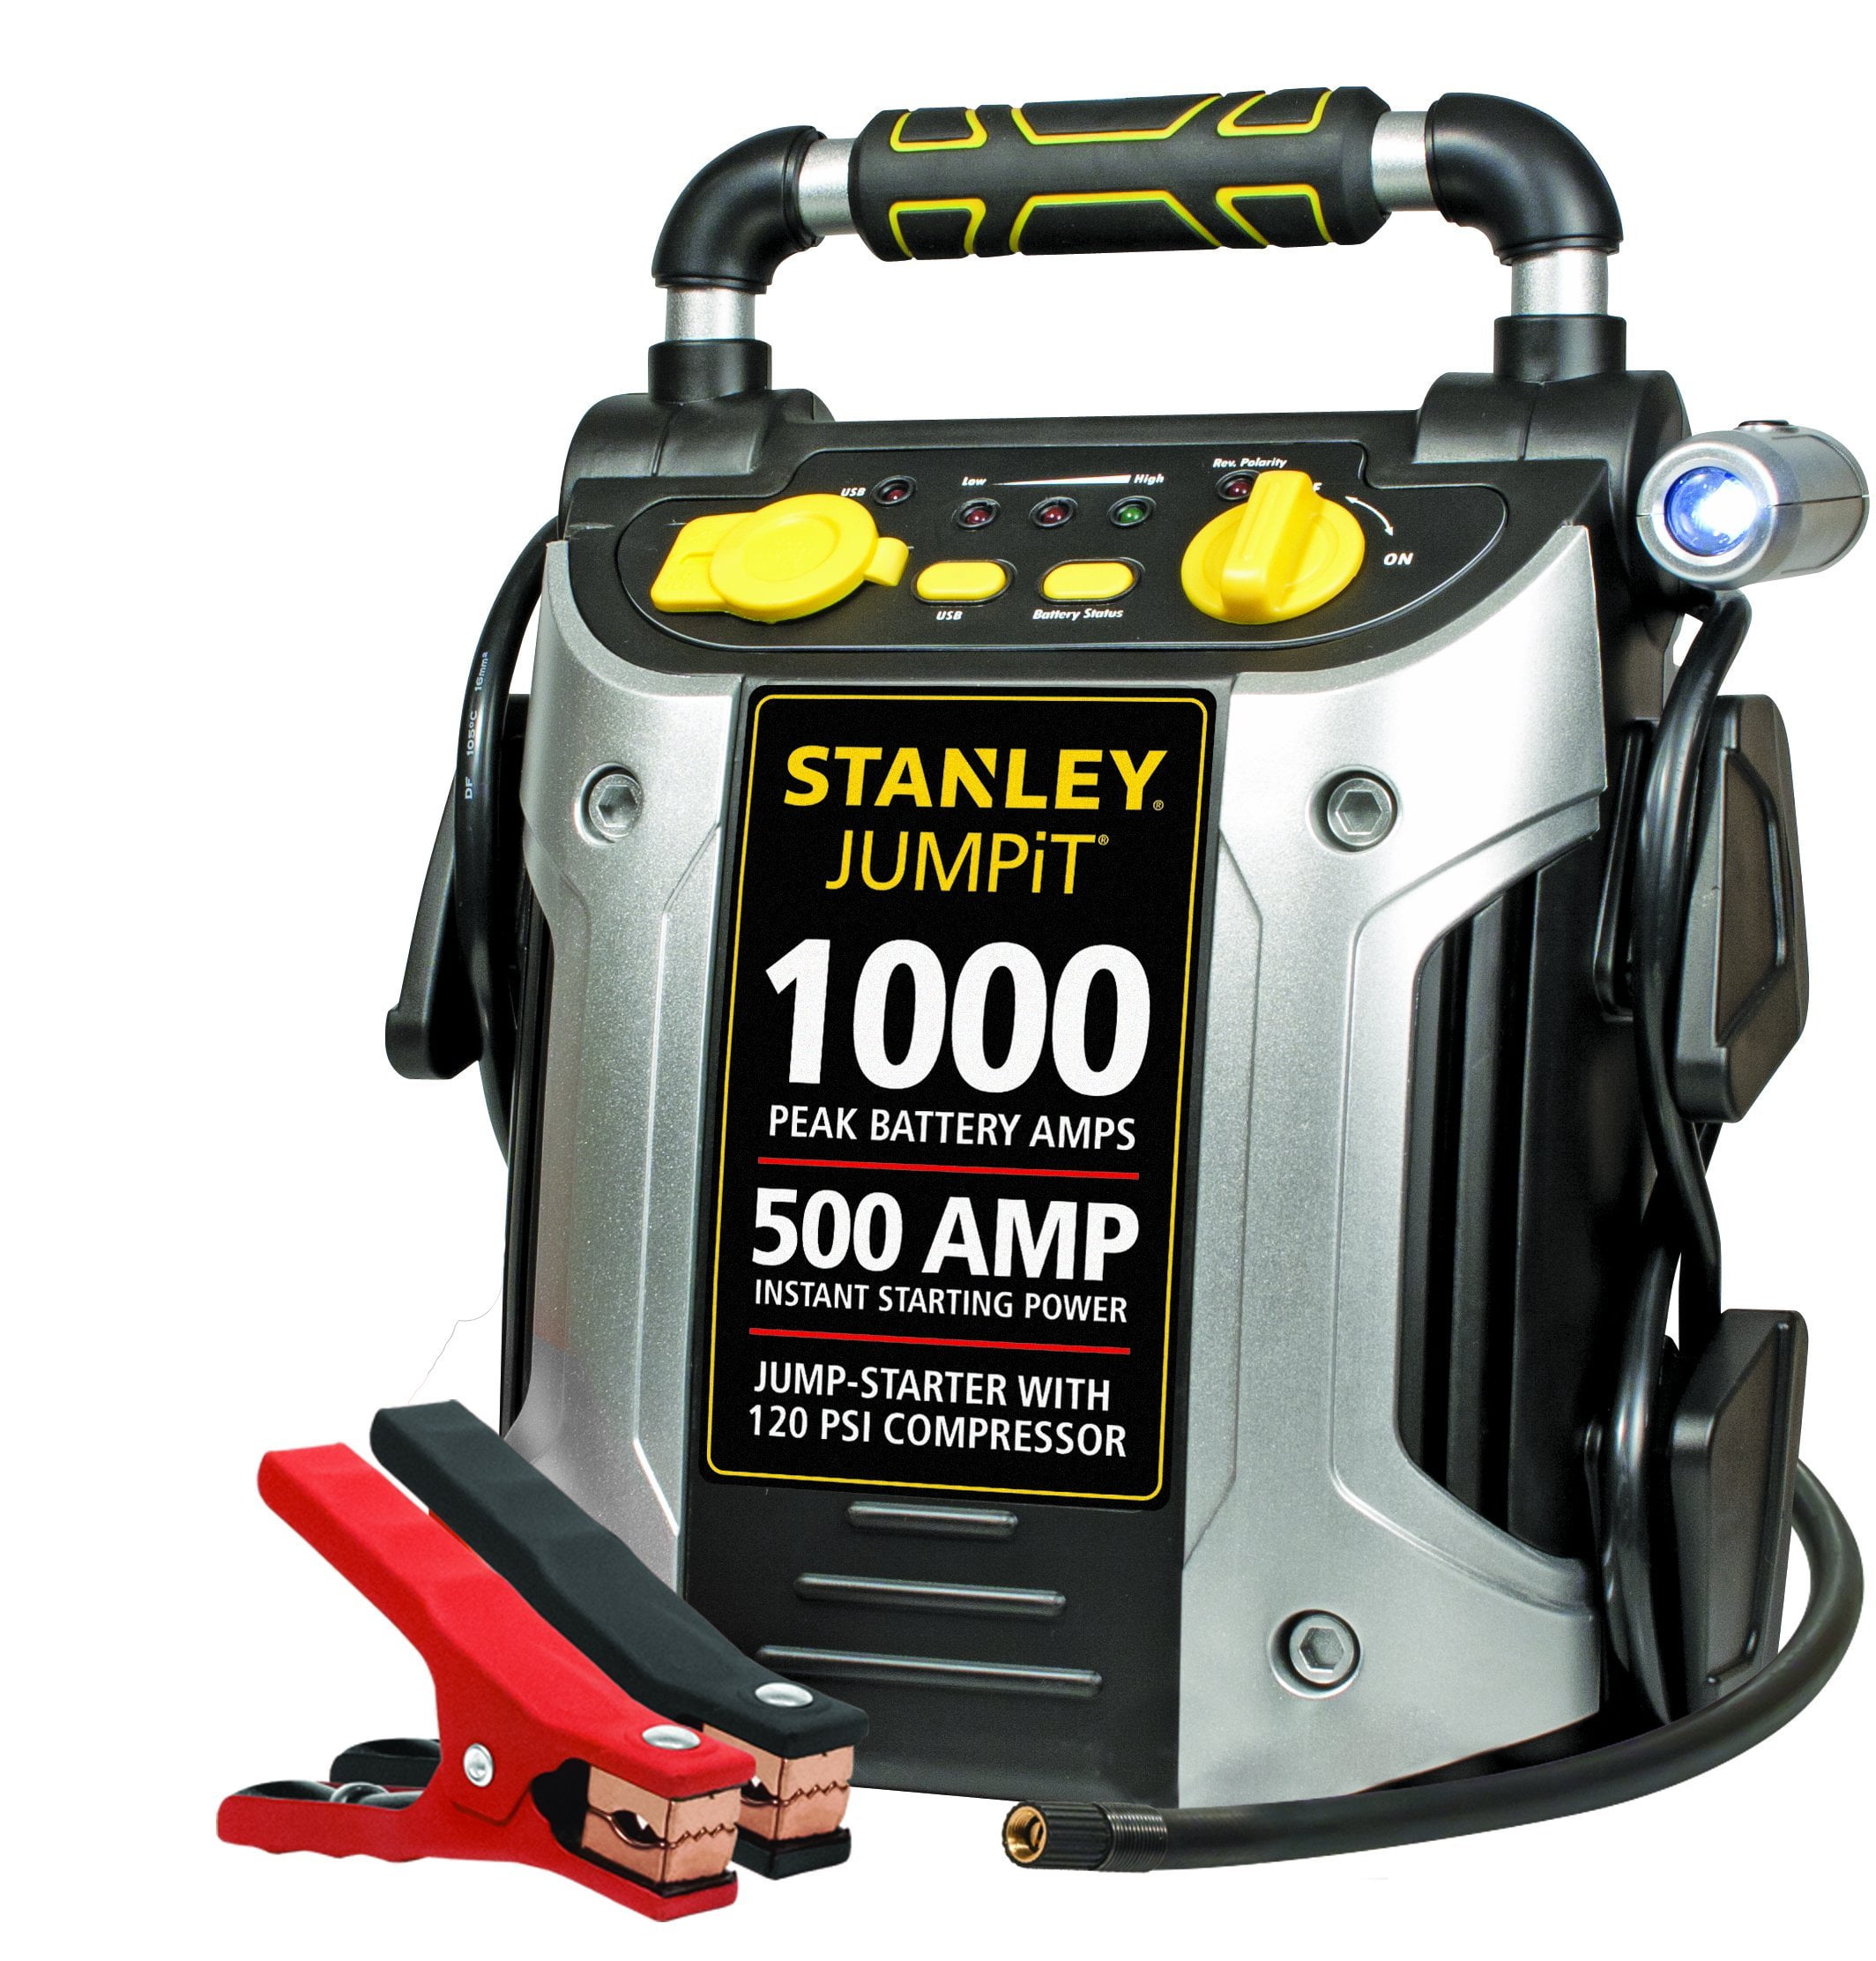 STANLEY J5C09 Power Station Jump Starter 1000 Peak, 500 Instant Amps, 120  PSI Air, Battery Clamps with Compressor